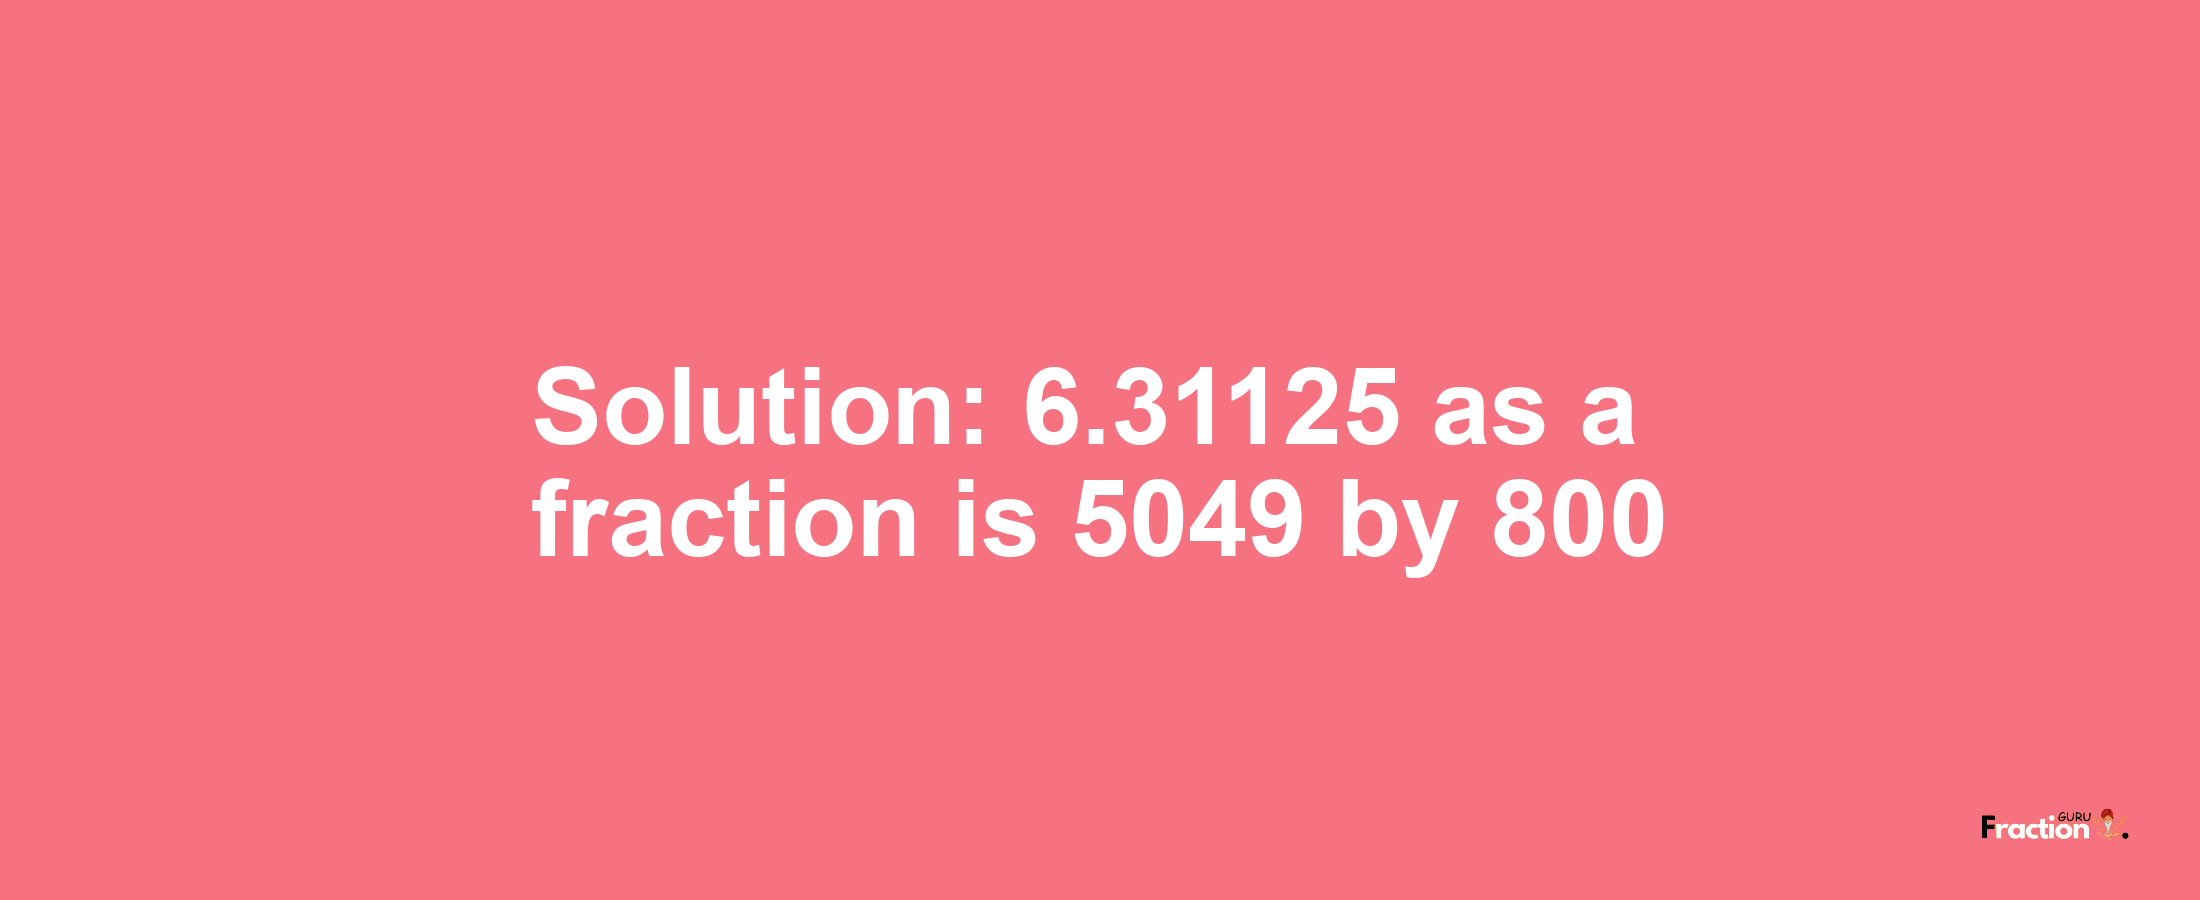 Solution:6.31125 as a fraction is 5049/800